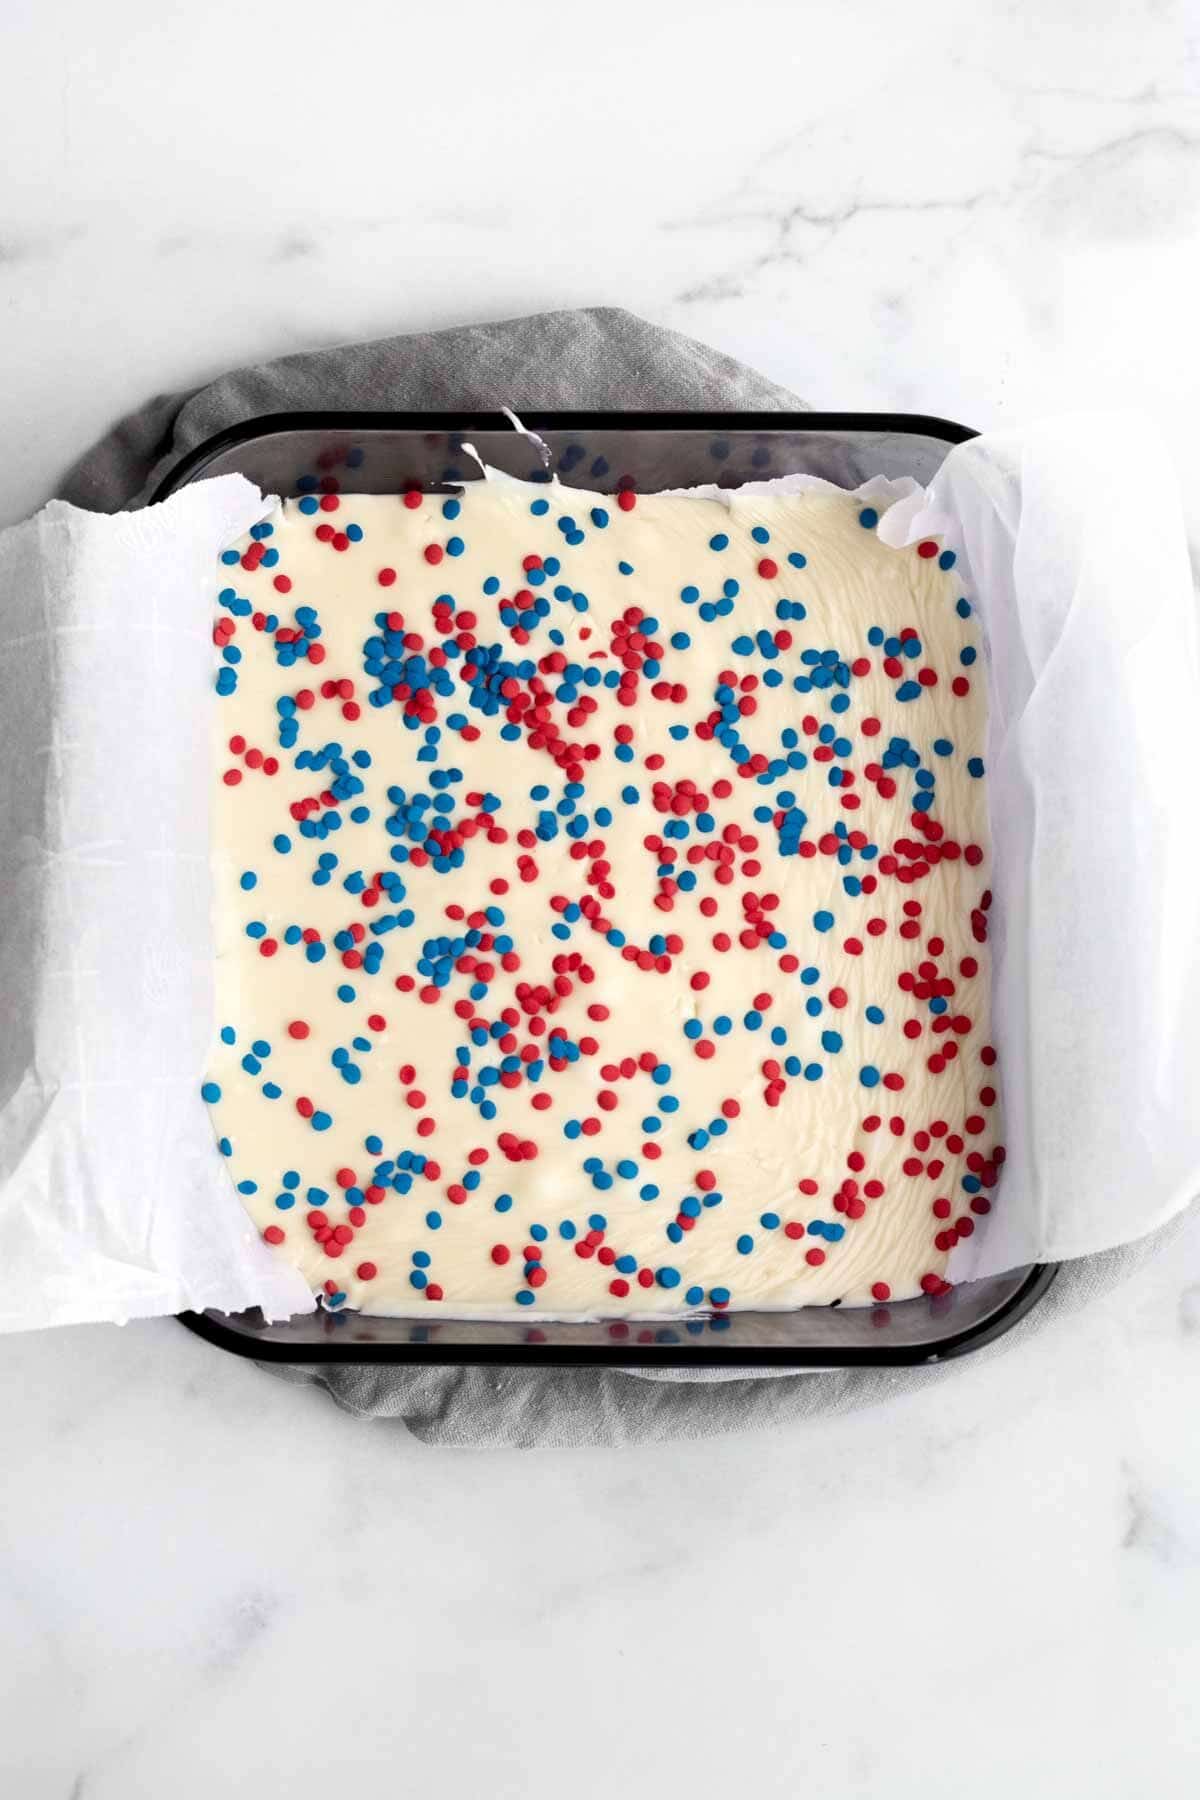 Poured fudge in a pan with red and blue sprinkles.